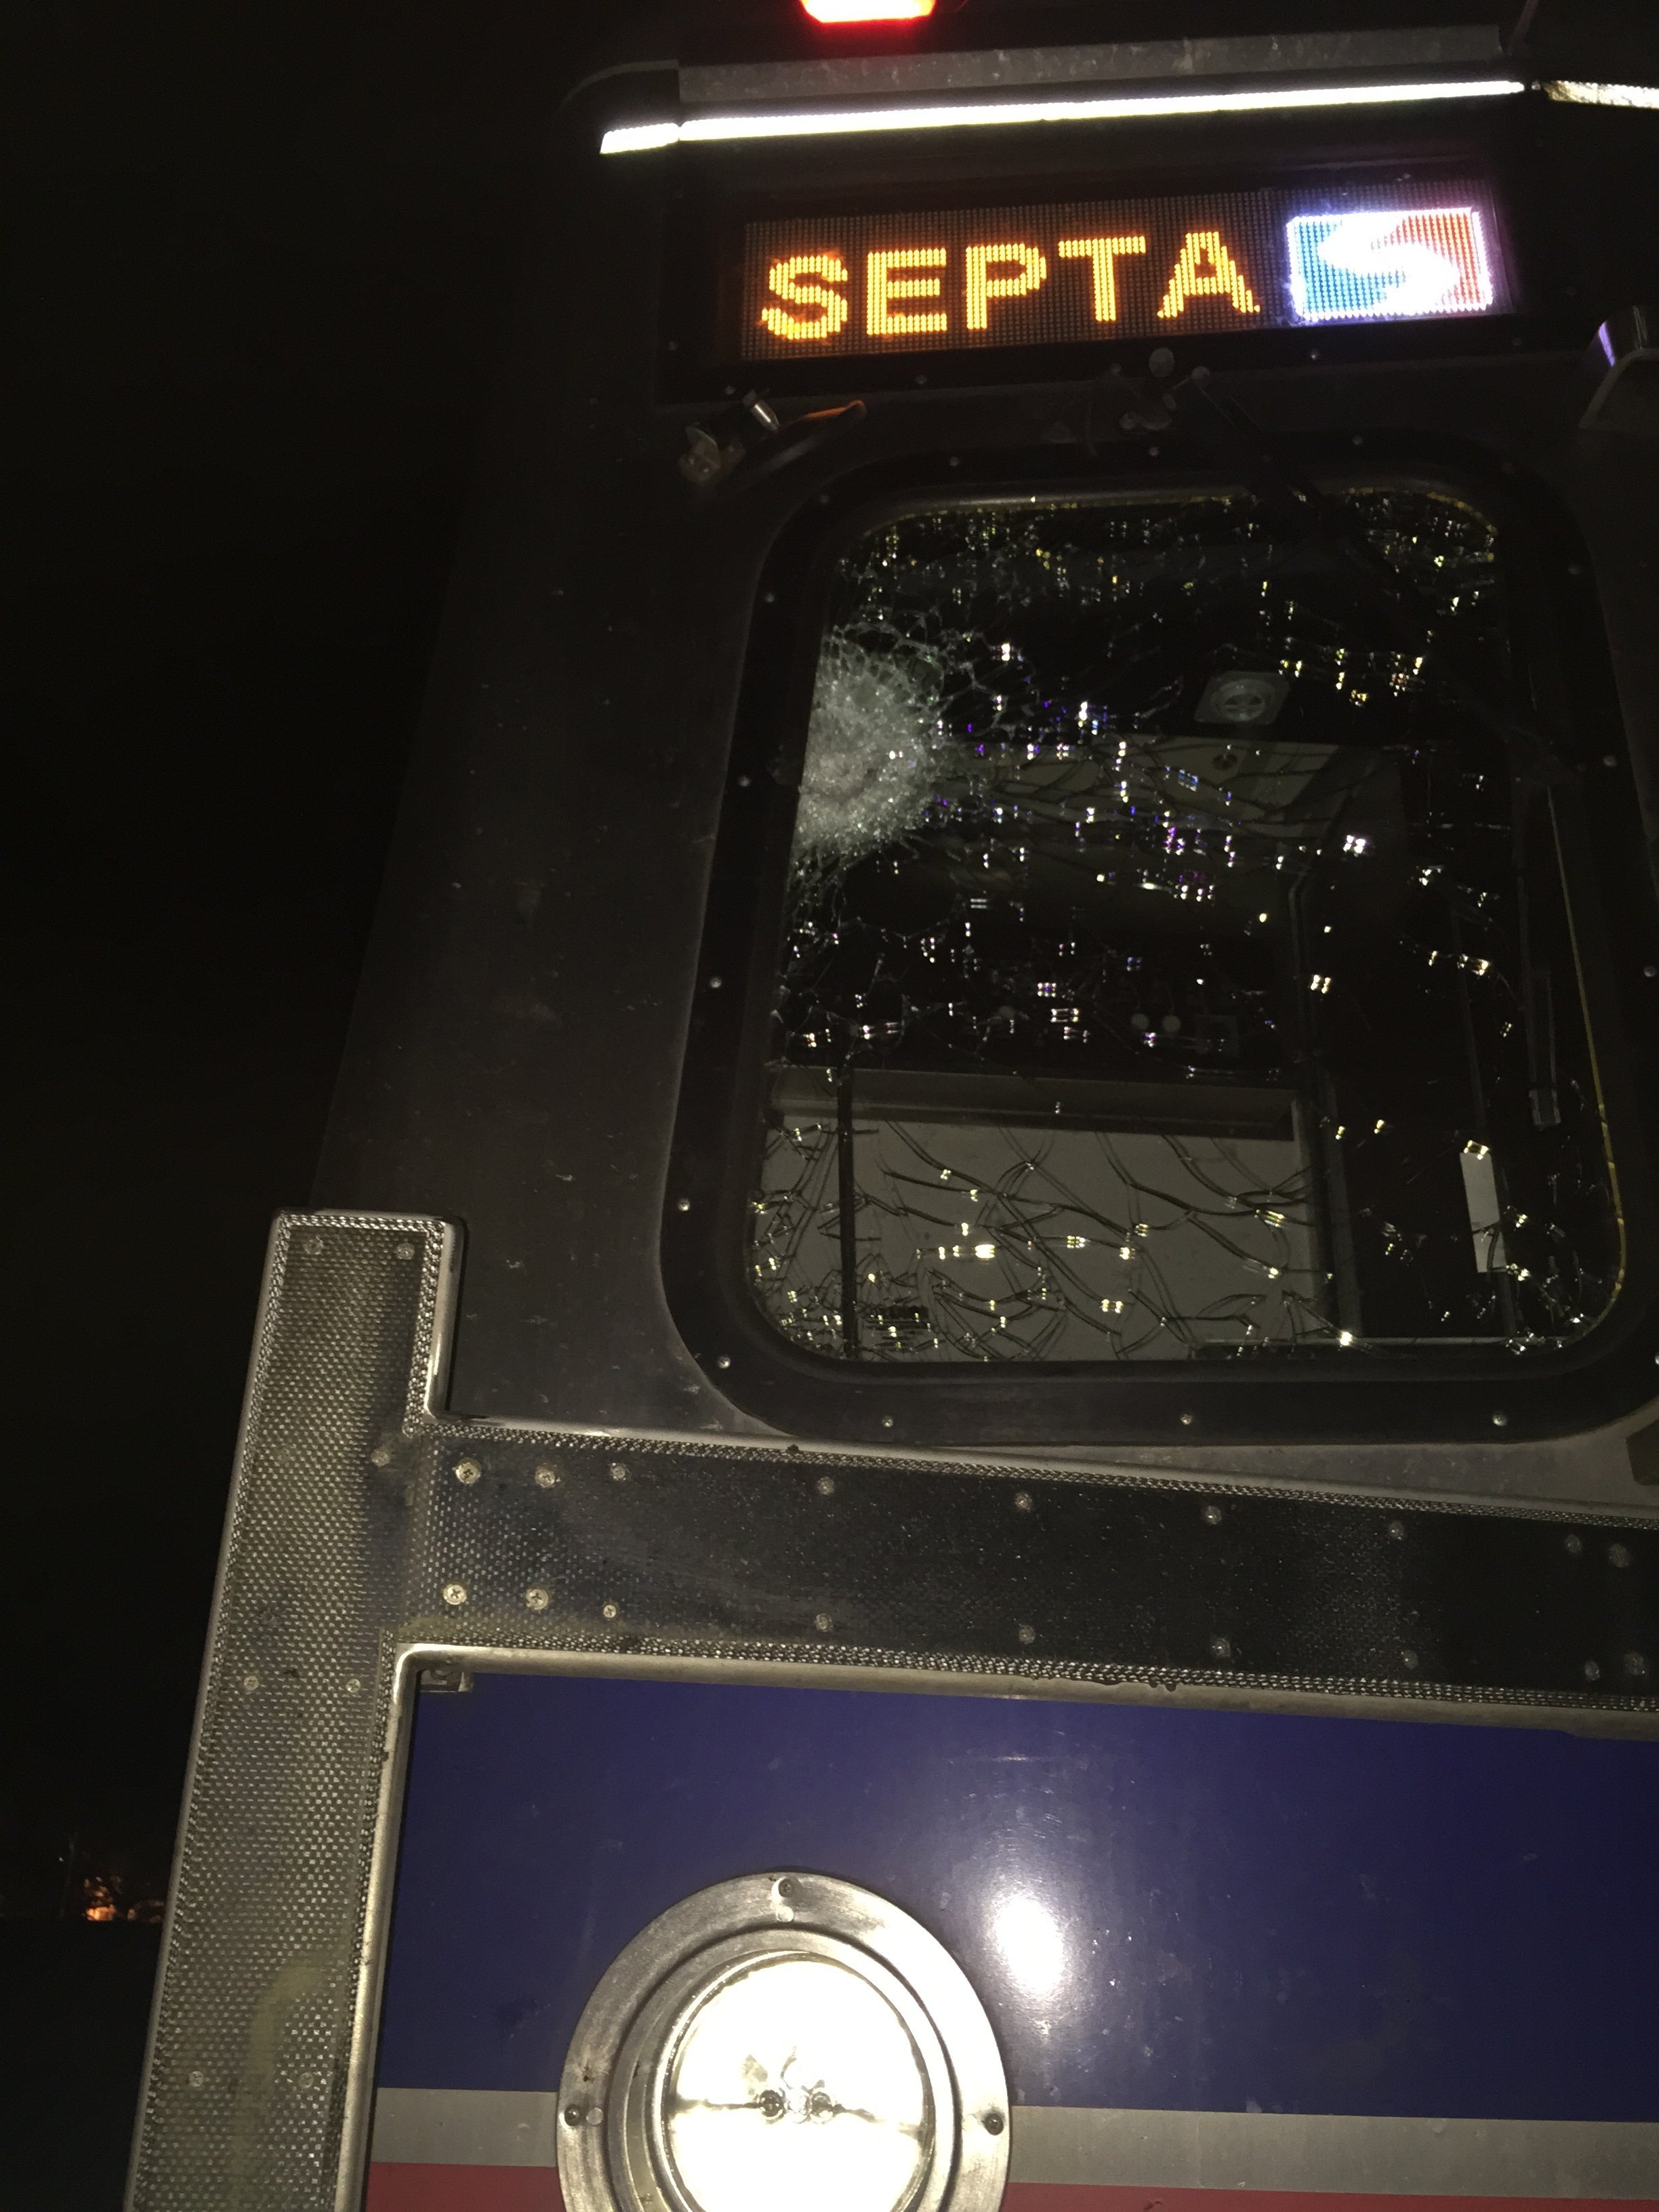 On Tuesday, May 12, at approximately 9:10 p.m., an unknown projectile struck the engineer's window of SEPTA Trenton Line train #769. The engineer did not report any injuries. The train was initially held near the North Philadelphia Station based on damage to the train window and later based on the suspension of the line due to the Amtrak derailment. The 80 SEPTA passengers were rescued and walked off train #769 and transferred to buses. The incident is currently under investigation.